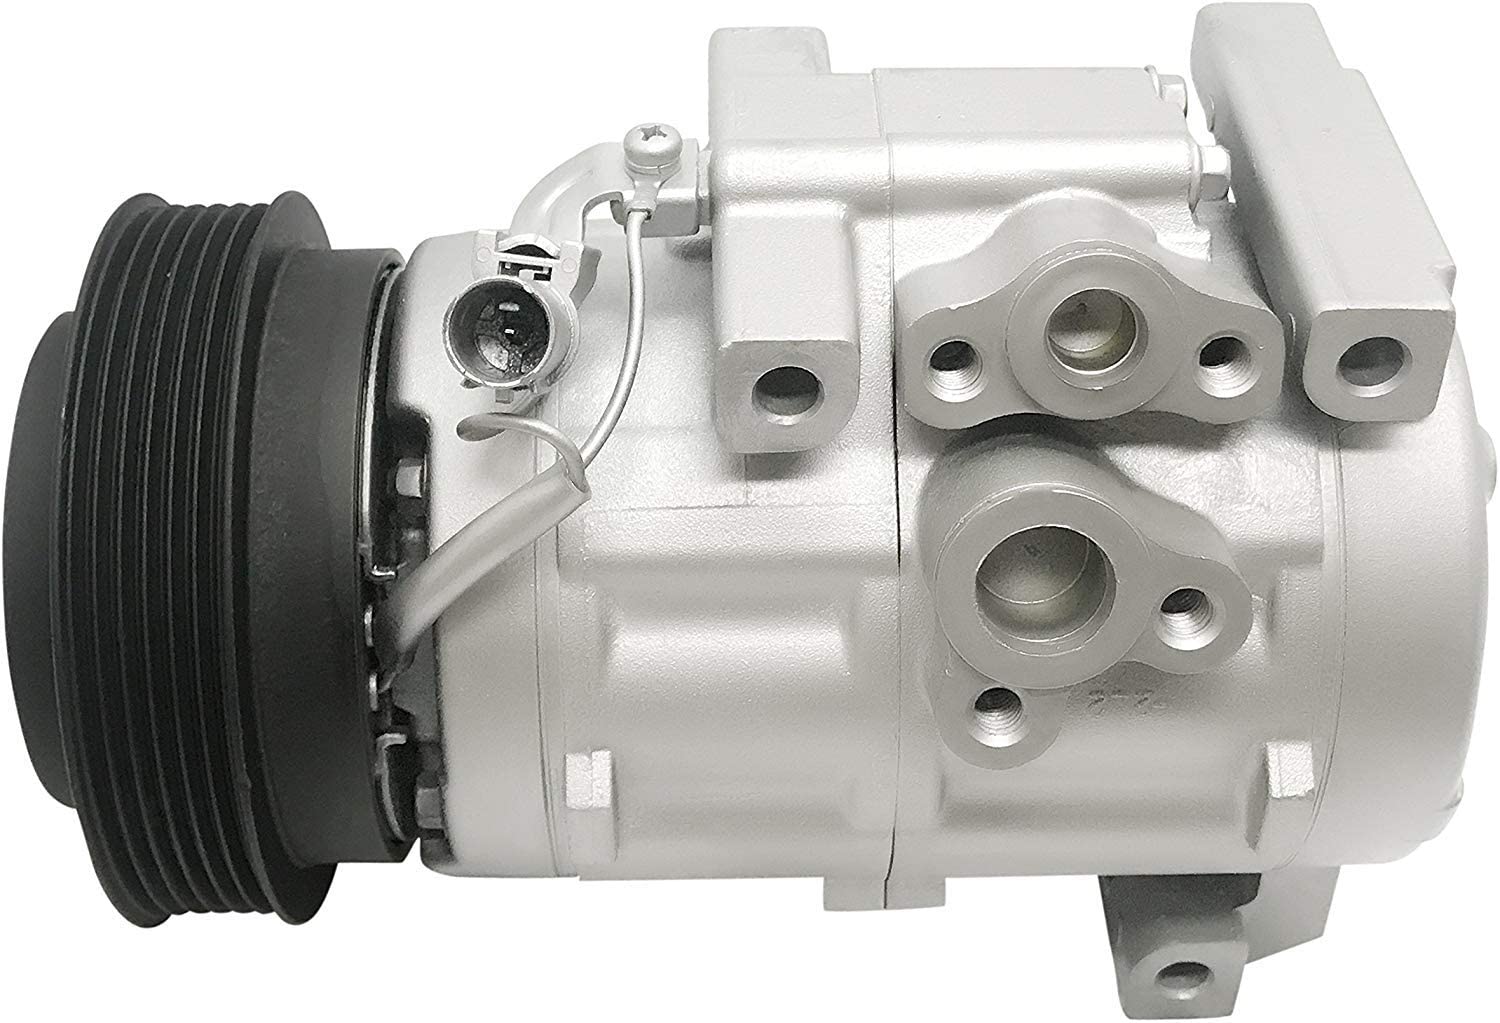 RYC Remanufactured AC Compressor and A/C Clutch AFG120 (DOES NOT FIT Kia Sorento 2009 3.3L or 3.8L)